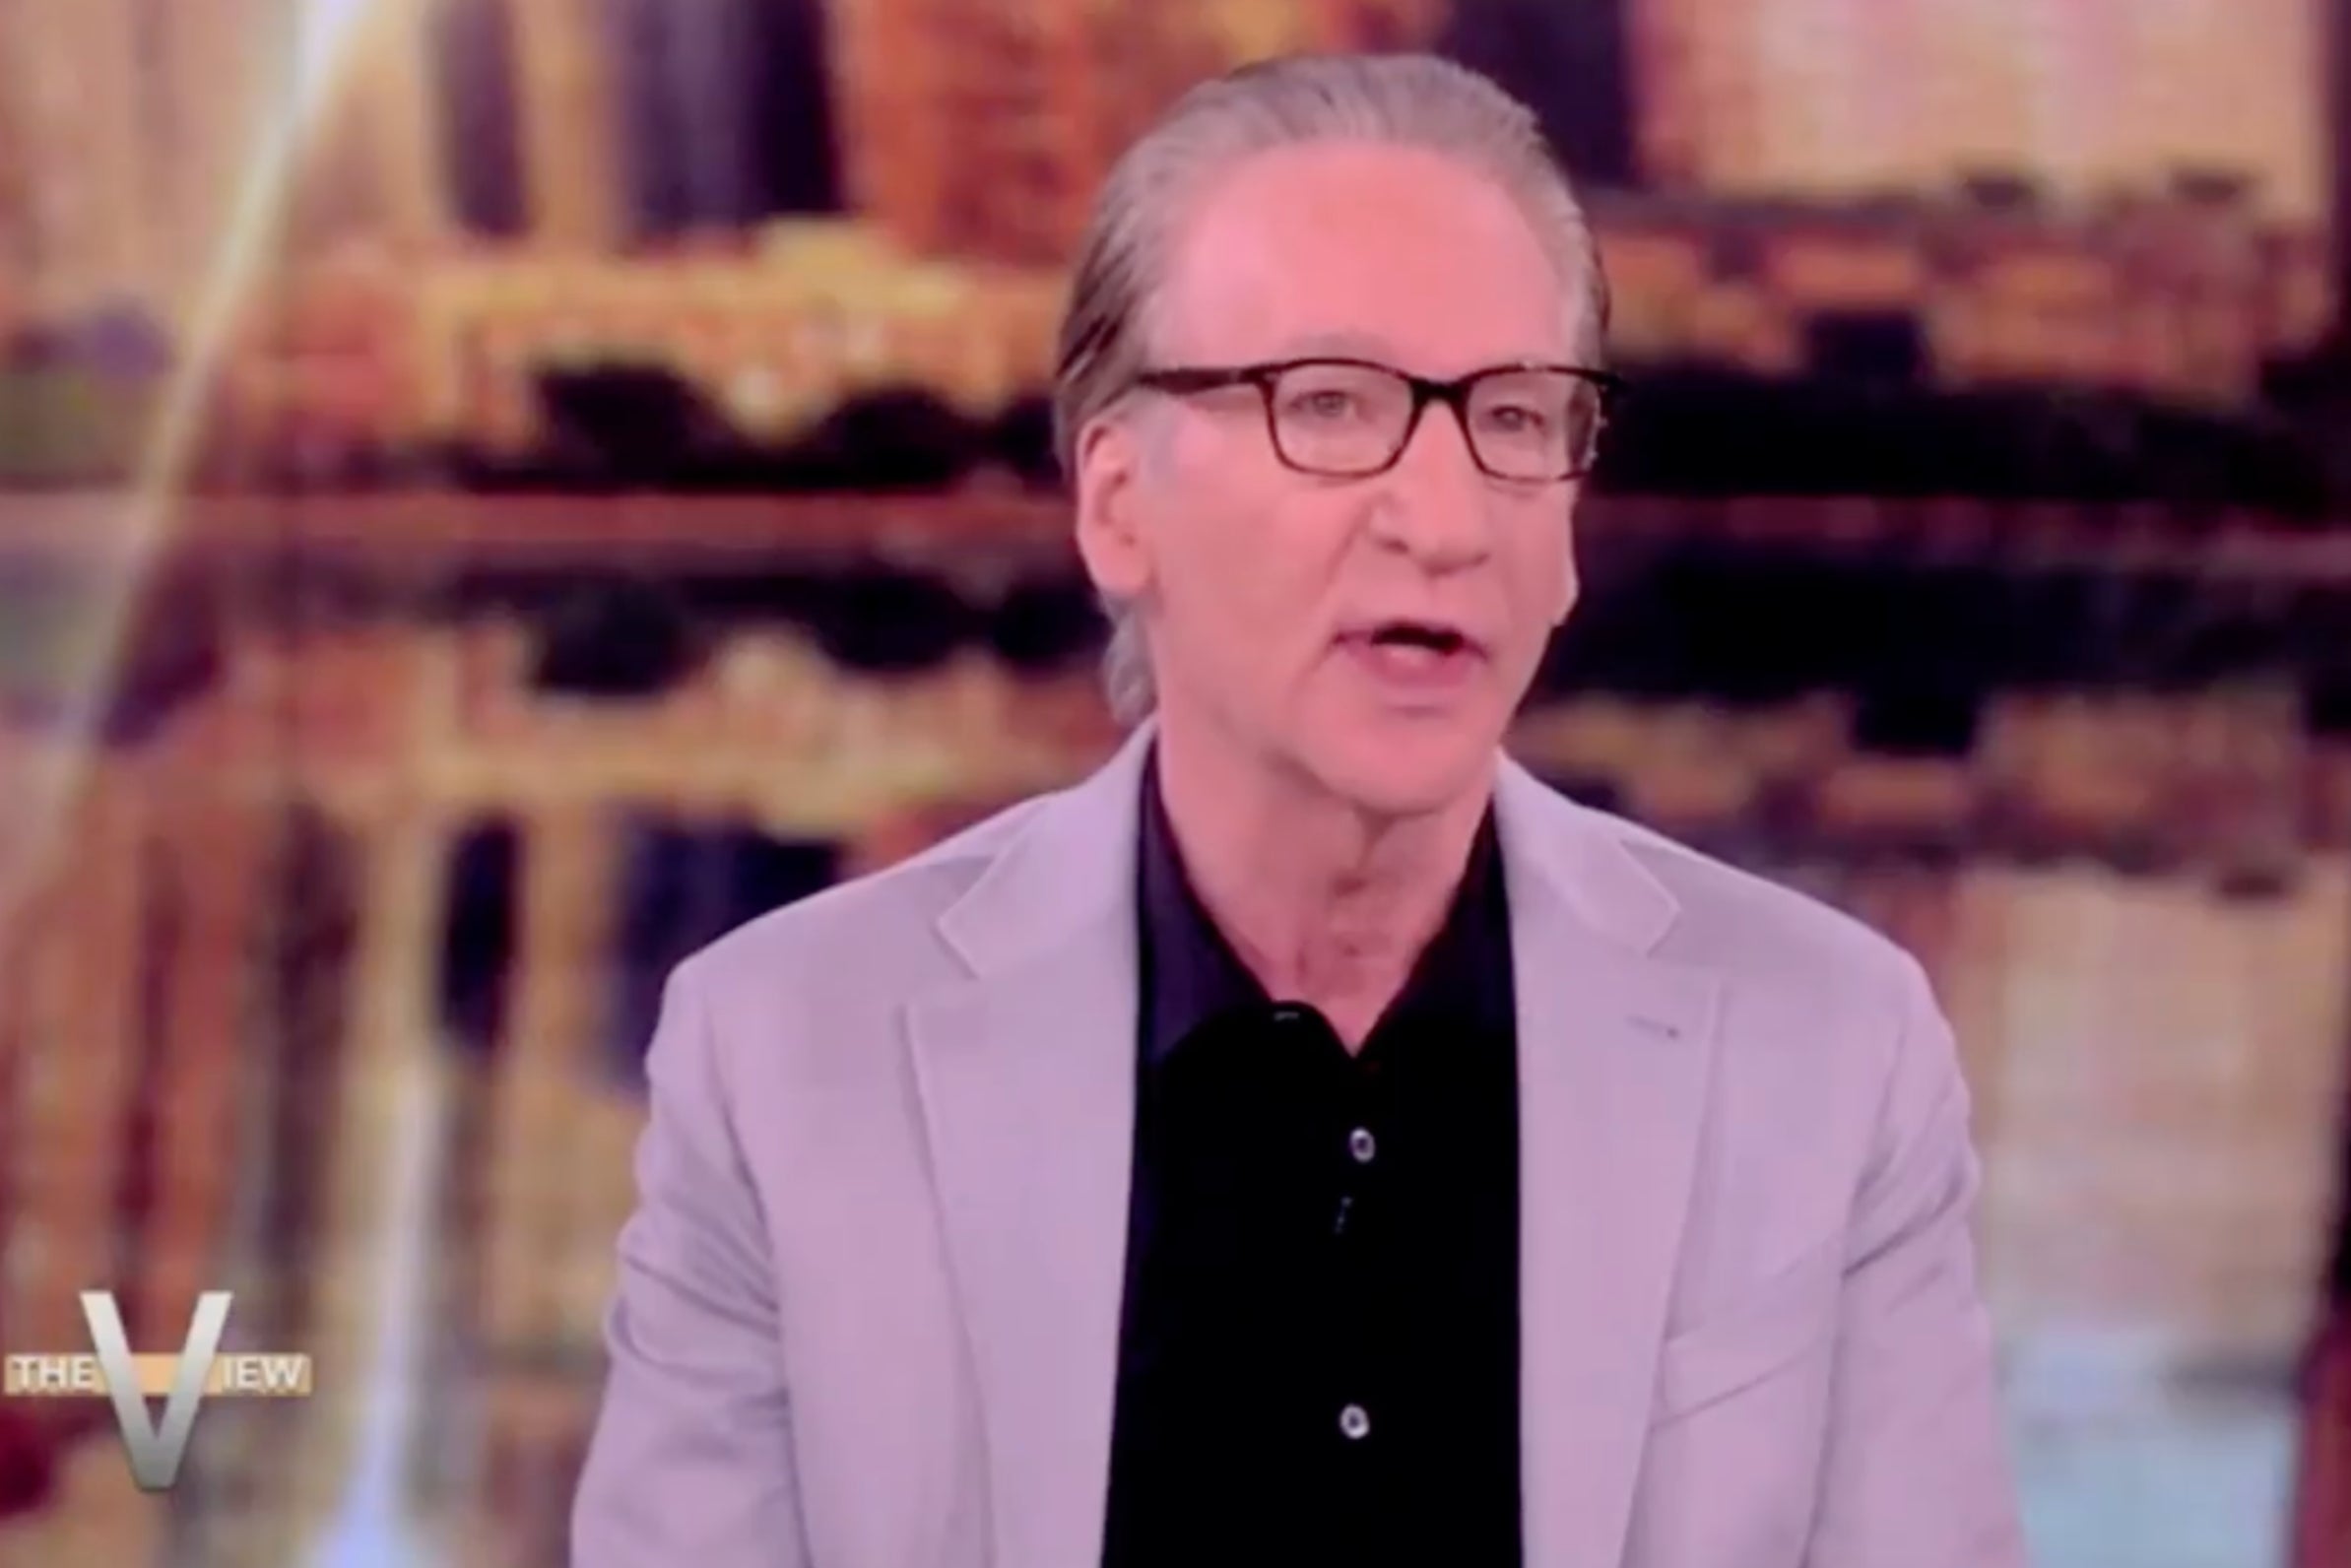 bill maher, the view, israel, hamas, bill maher joke about antisemitism met with silence on the view: ‘too dark!’